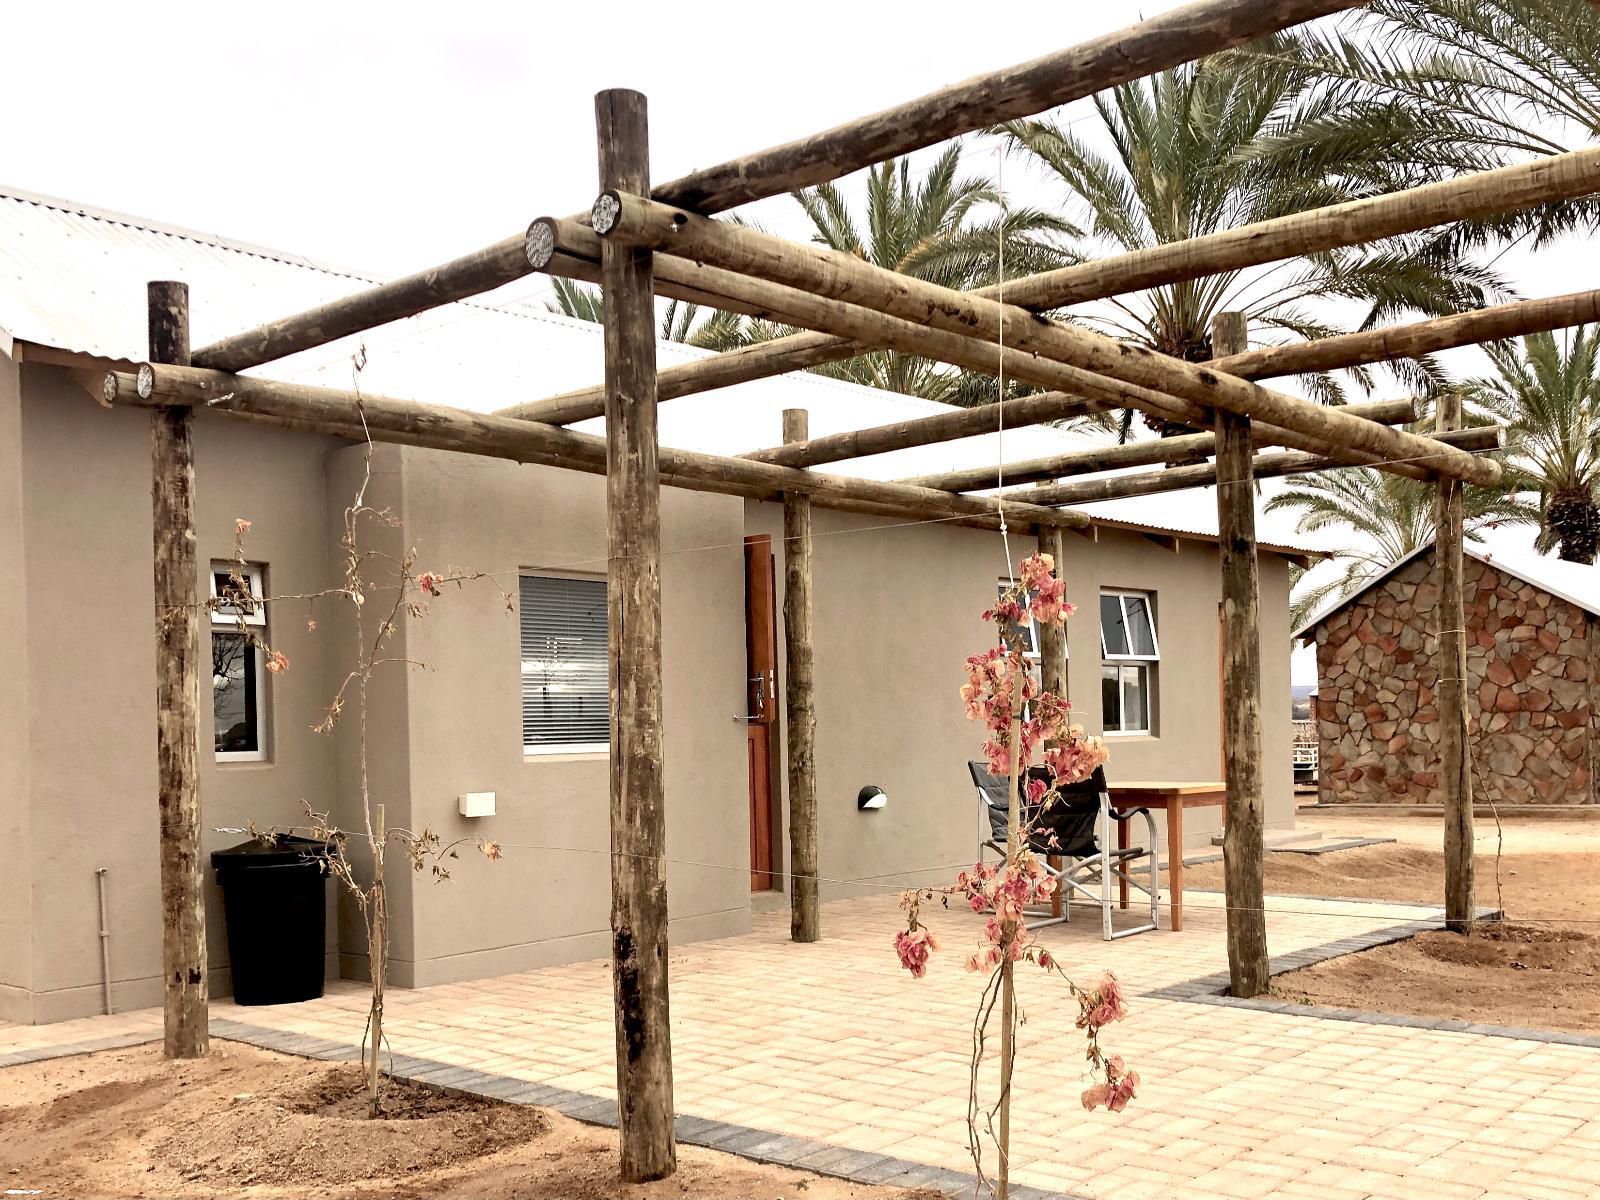 Gazelle Estate Kakamas Northern Cape South Africa House, Building, Architecture, Palm Tree, Plant, Nature, Wood